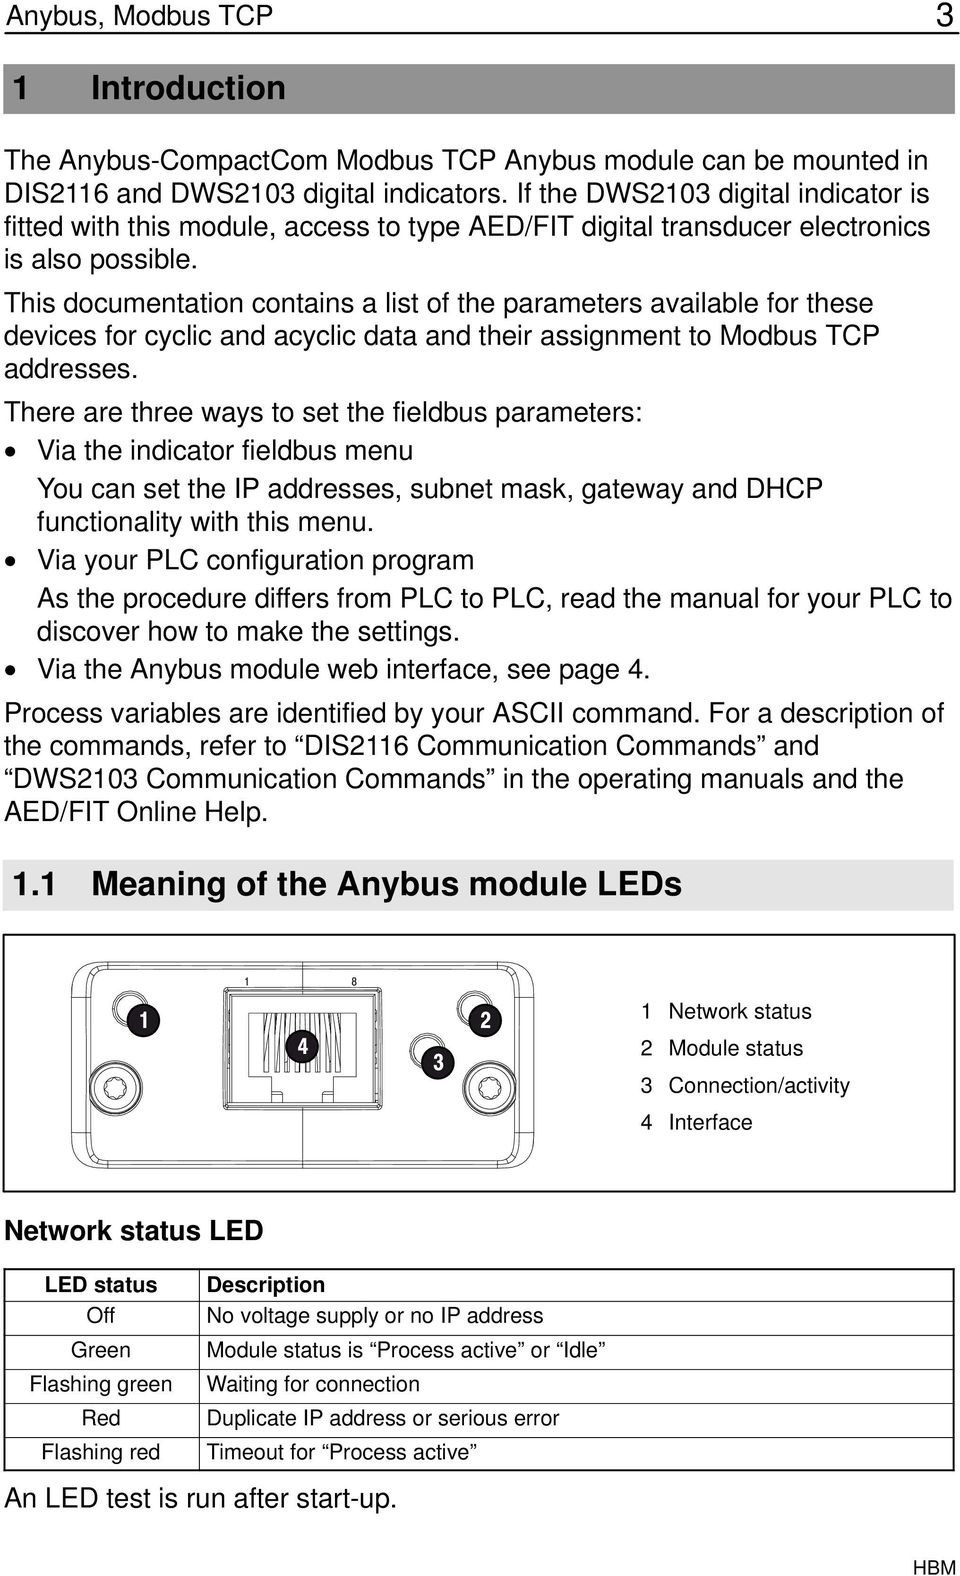 This documentation contains a list of the parameters available for these devices for cyclic and acyclic data and their assignment to Modbus TCP addresses.